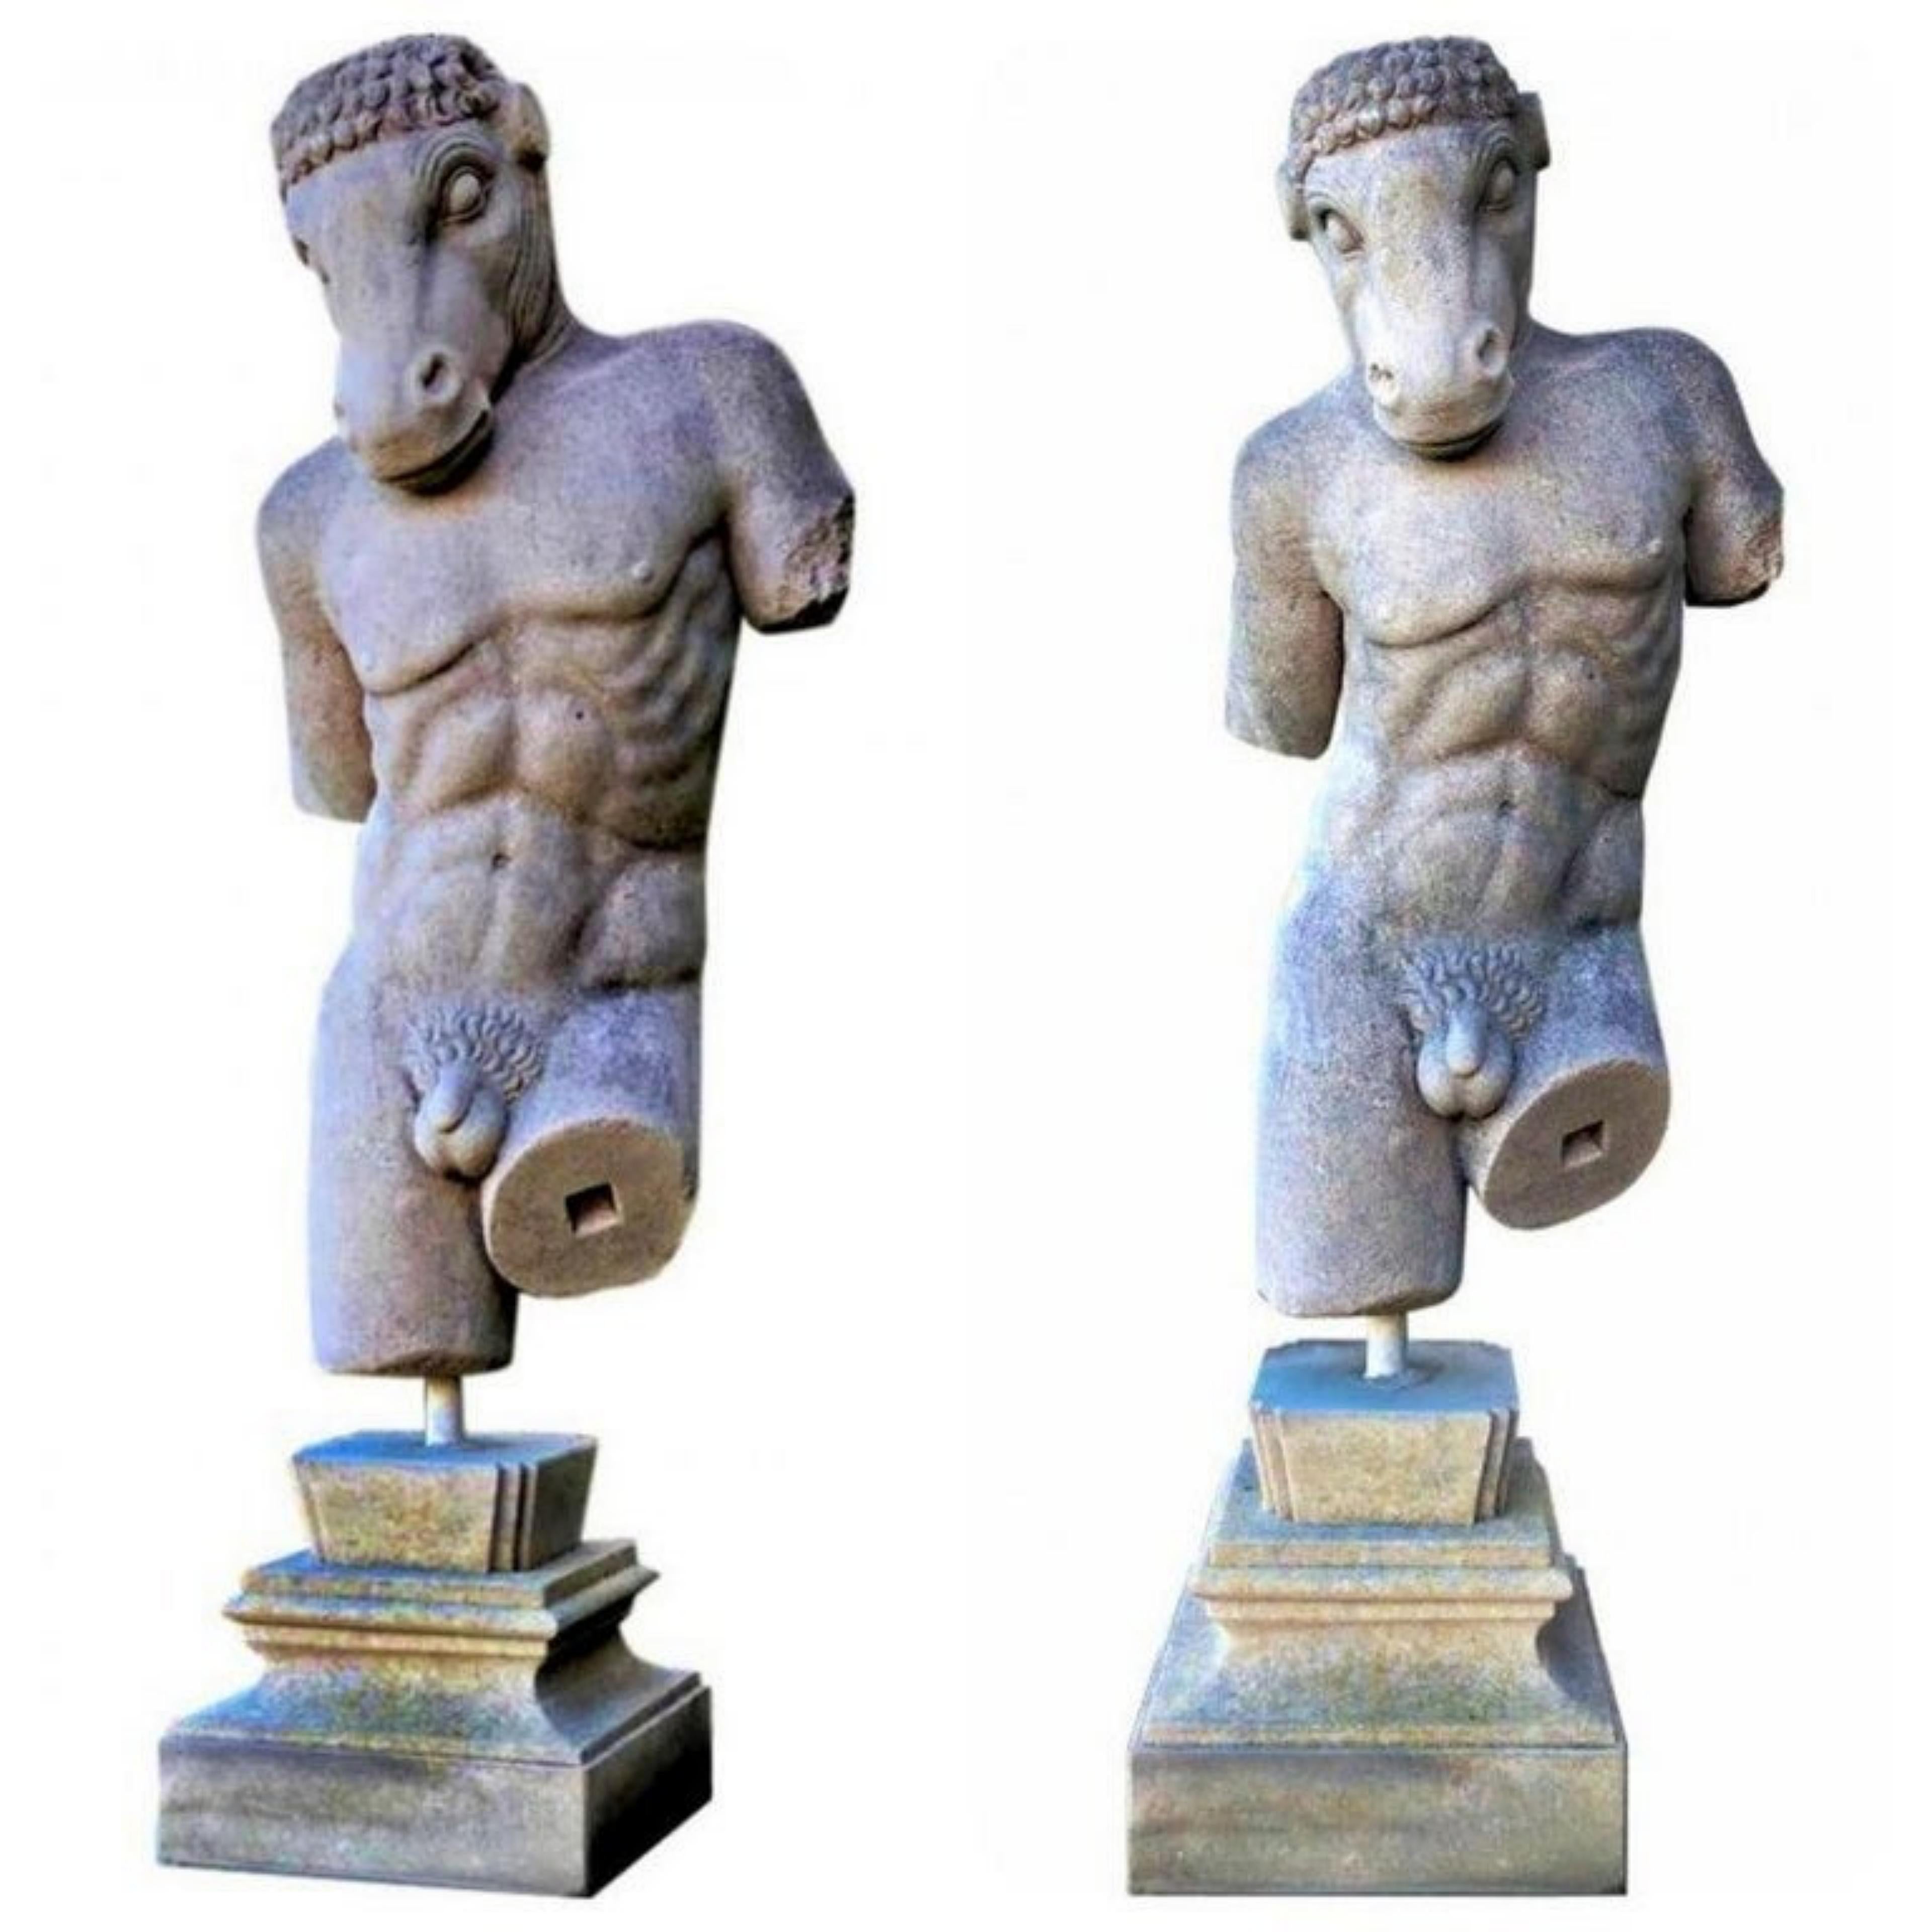 Minotaur of knossos labyrinth in white limestone 20th century.

Measures: Height 125cm
Width 60cm
Depth 60cm
Weight 160kg
Base height included 40 cm
Museum-type base included height 84 cm
Material calcarenite / limestone
Note 01 hand made in